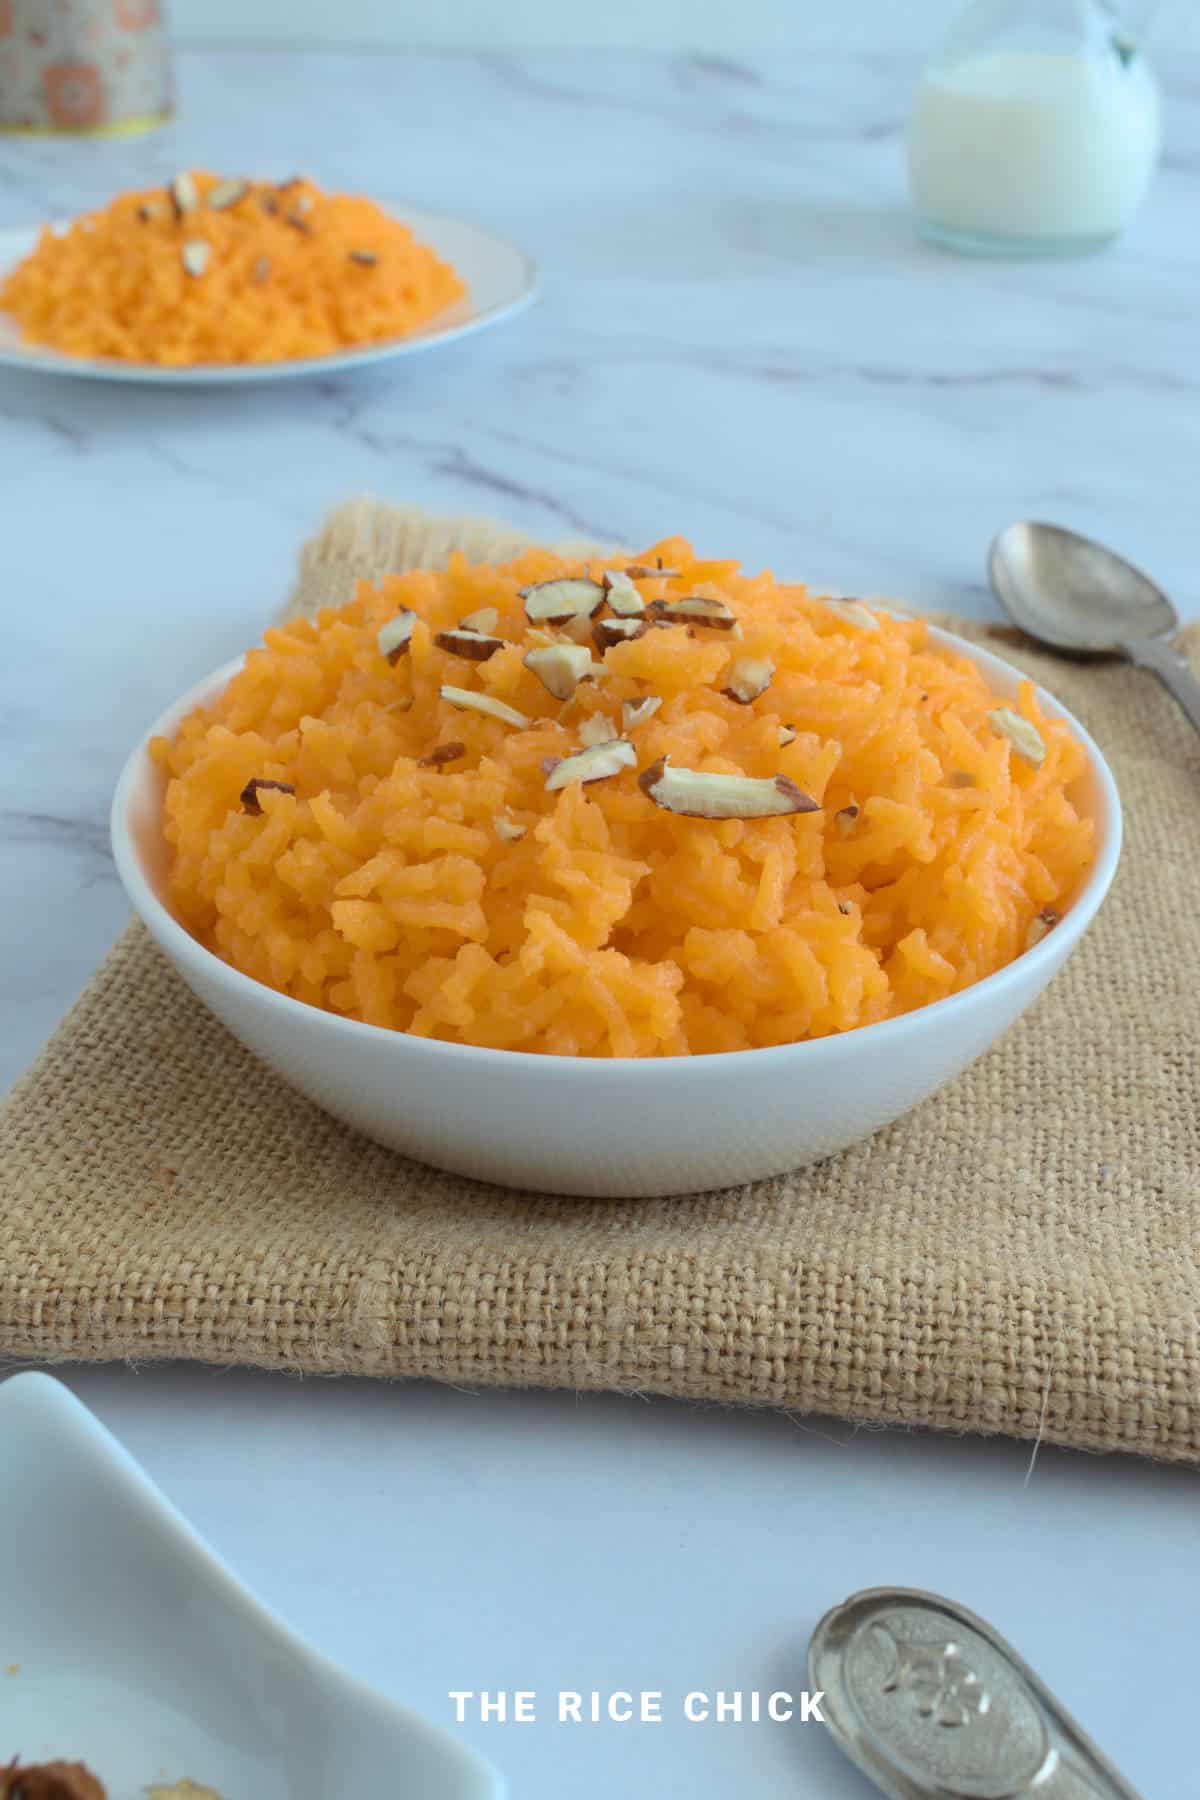 Orange rice in a bowl with chopped nuts on top.